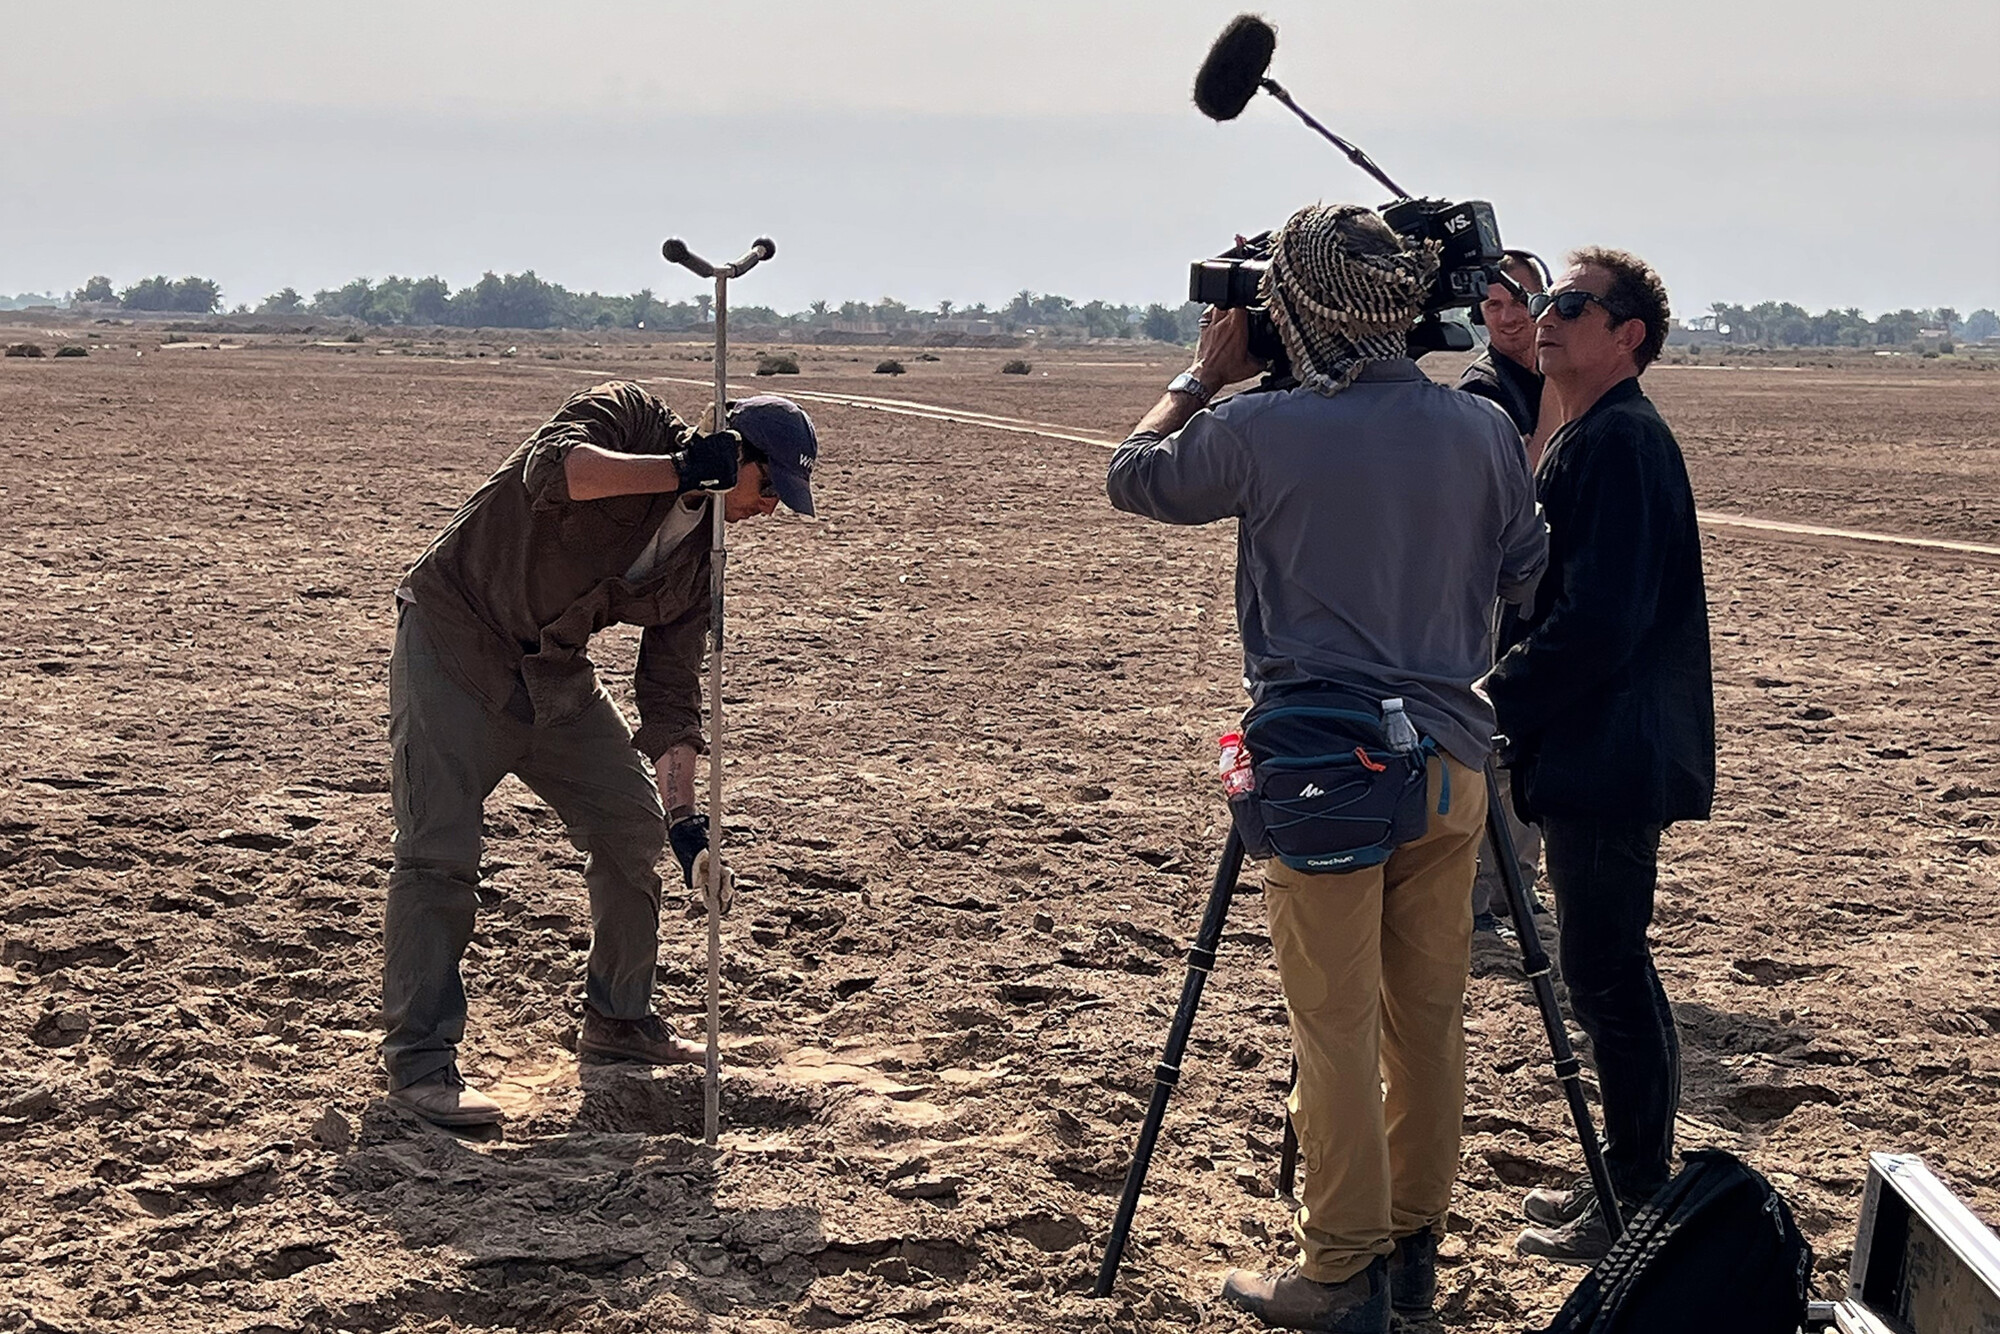 video filming of drilling at lagash